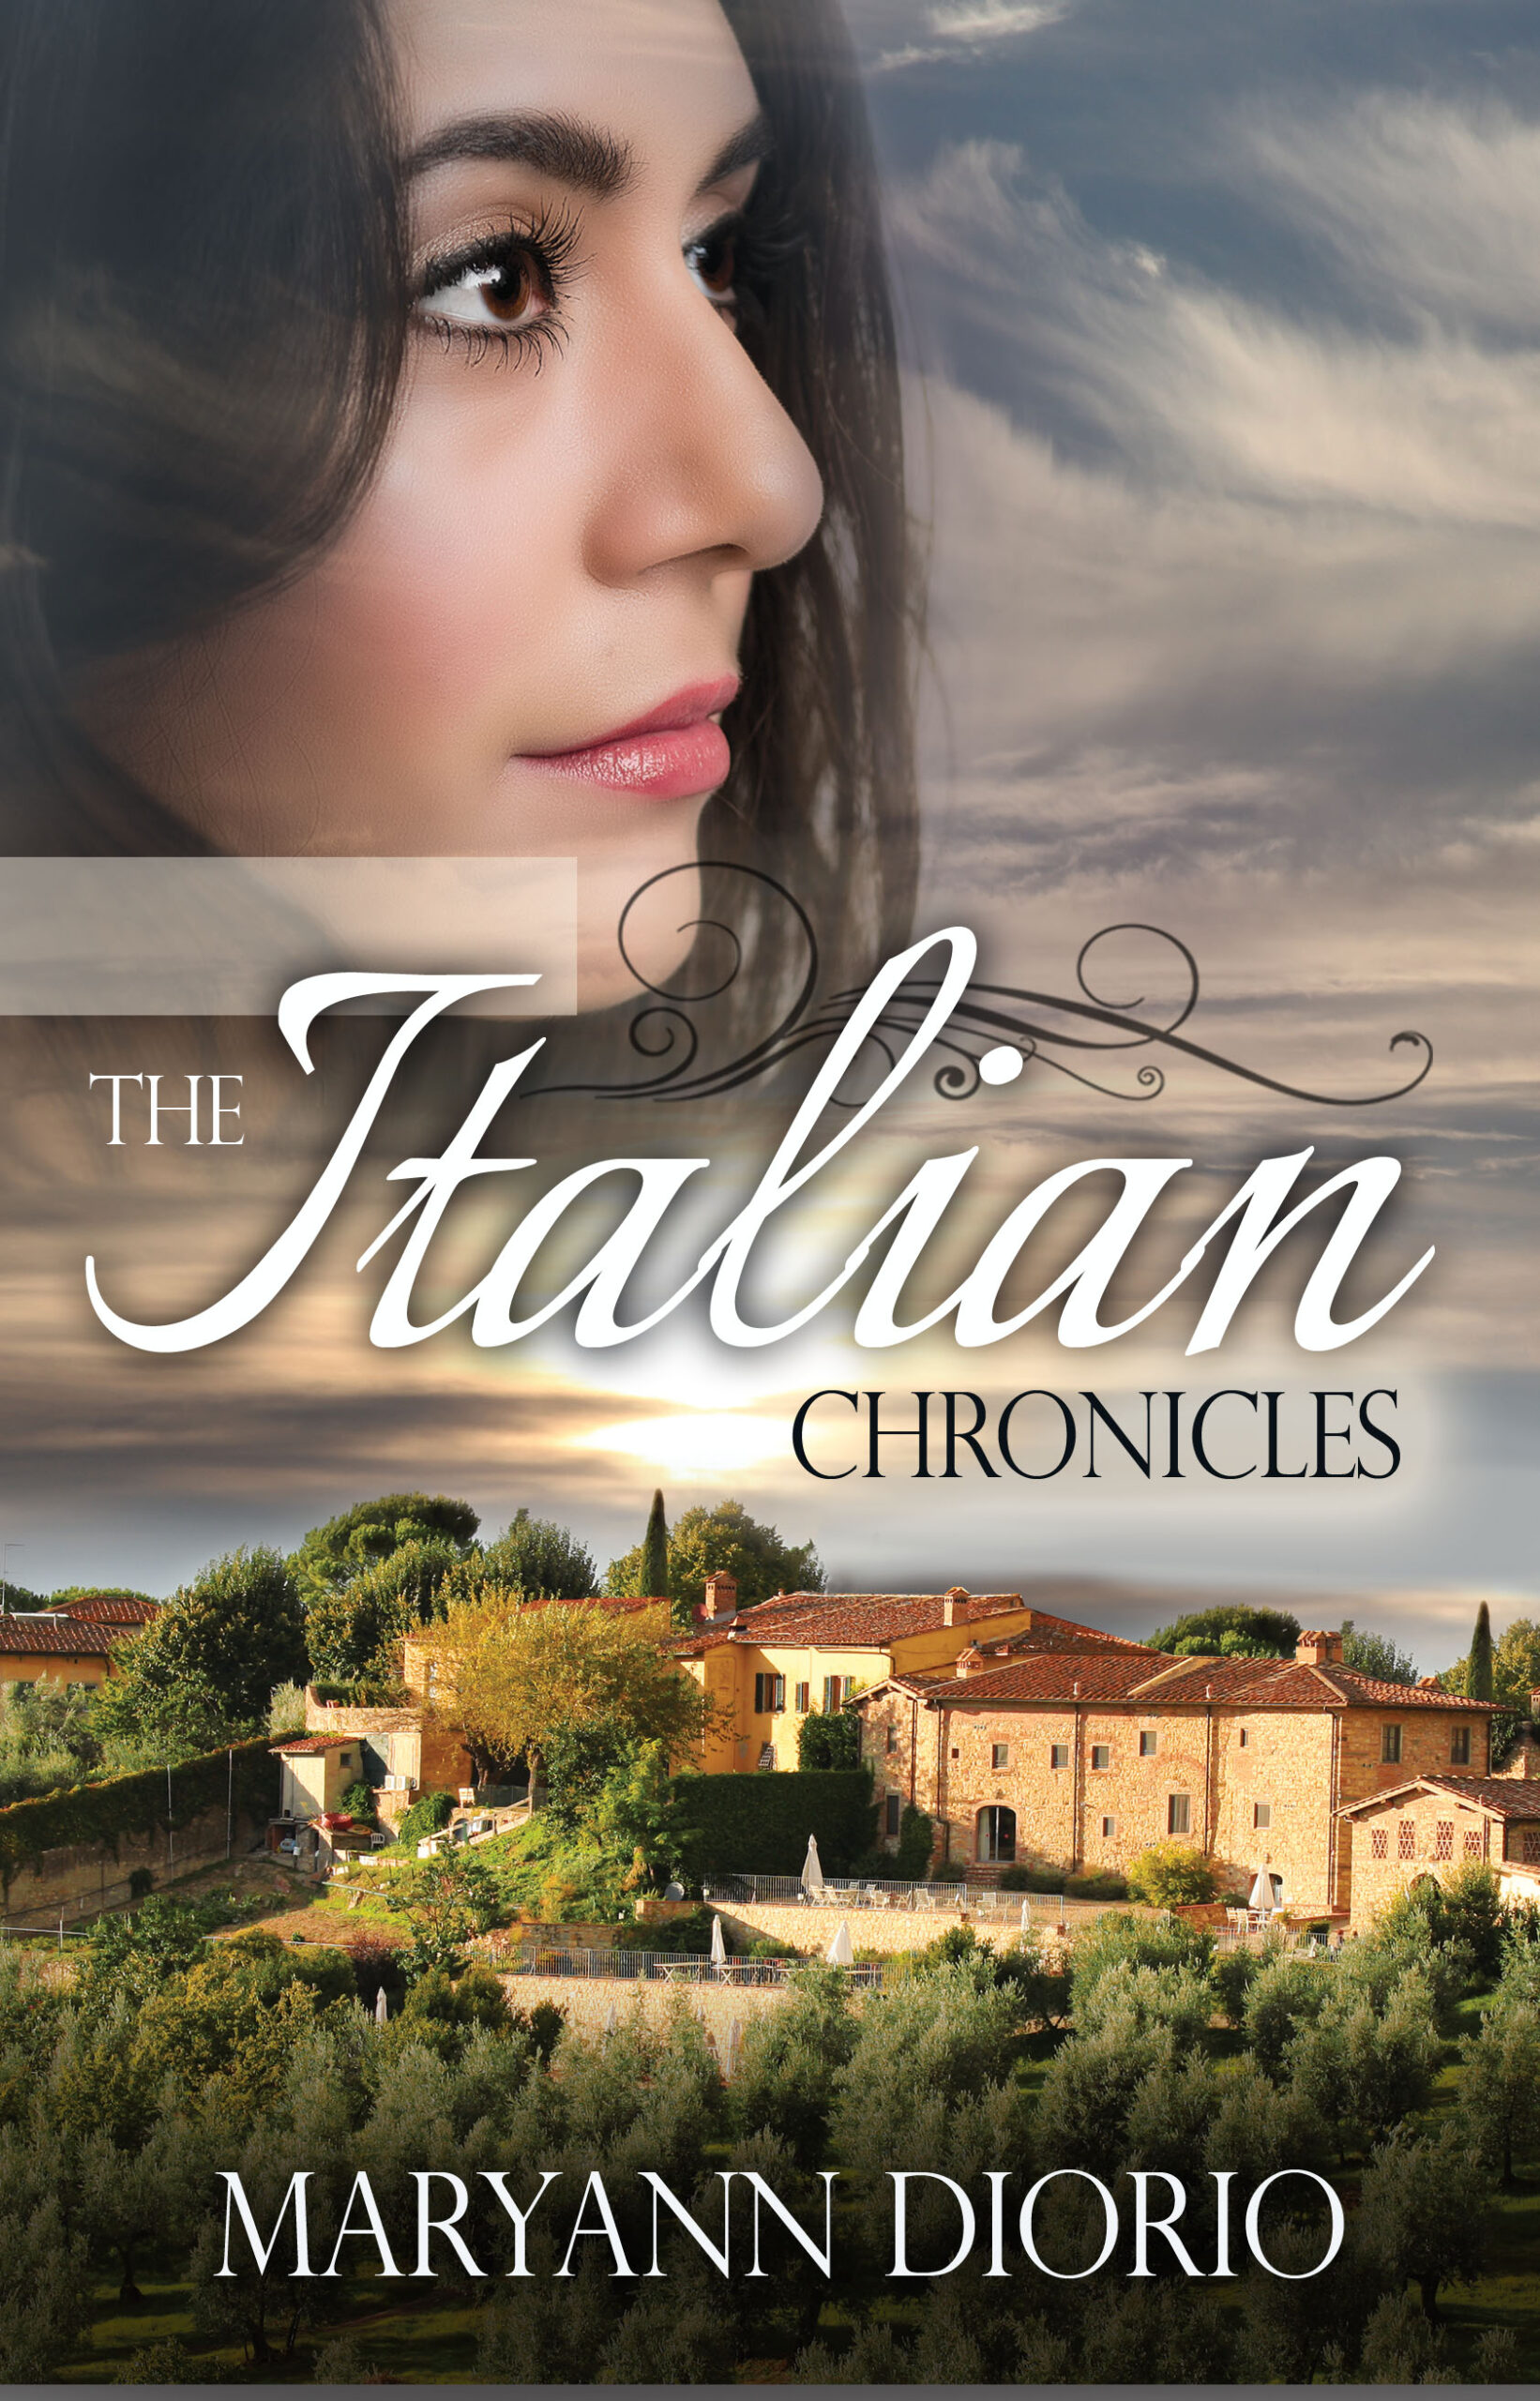 The Italian Chronicles: The Complete Trilogy of Novels